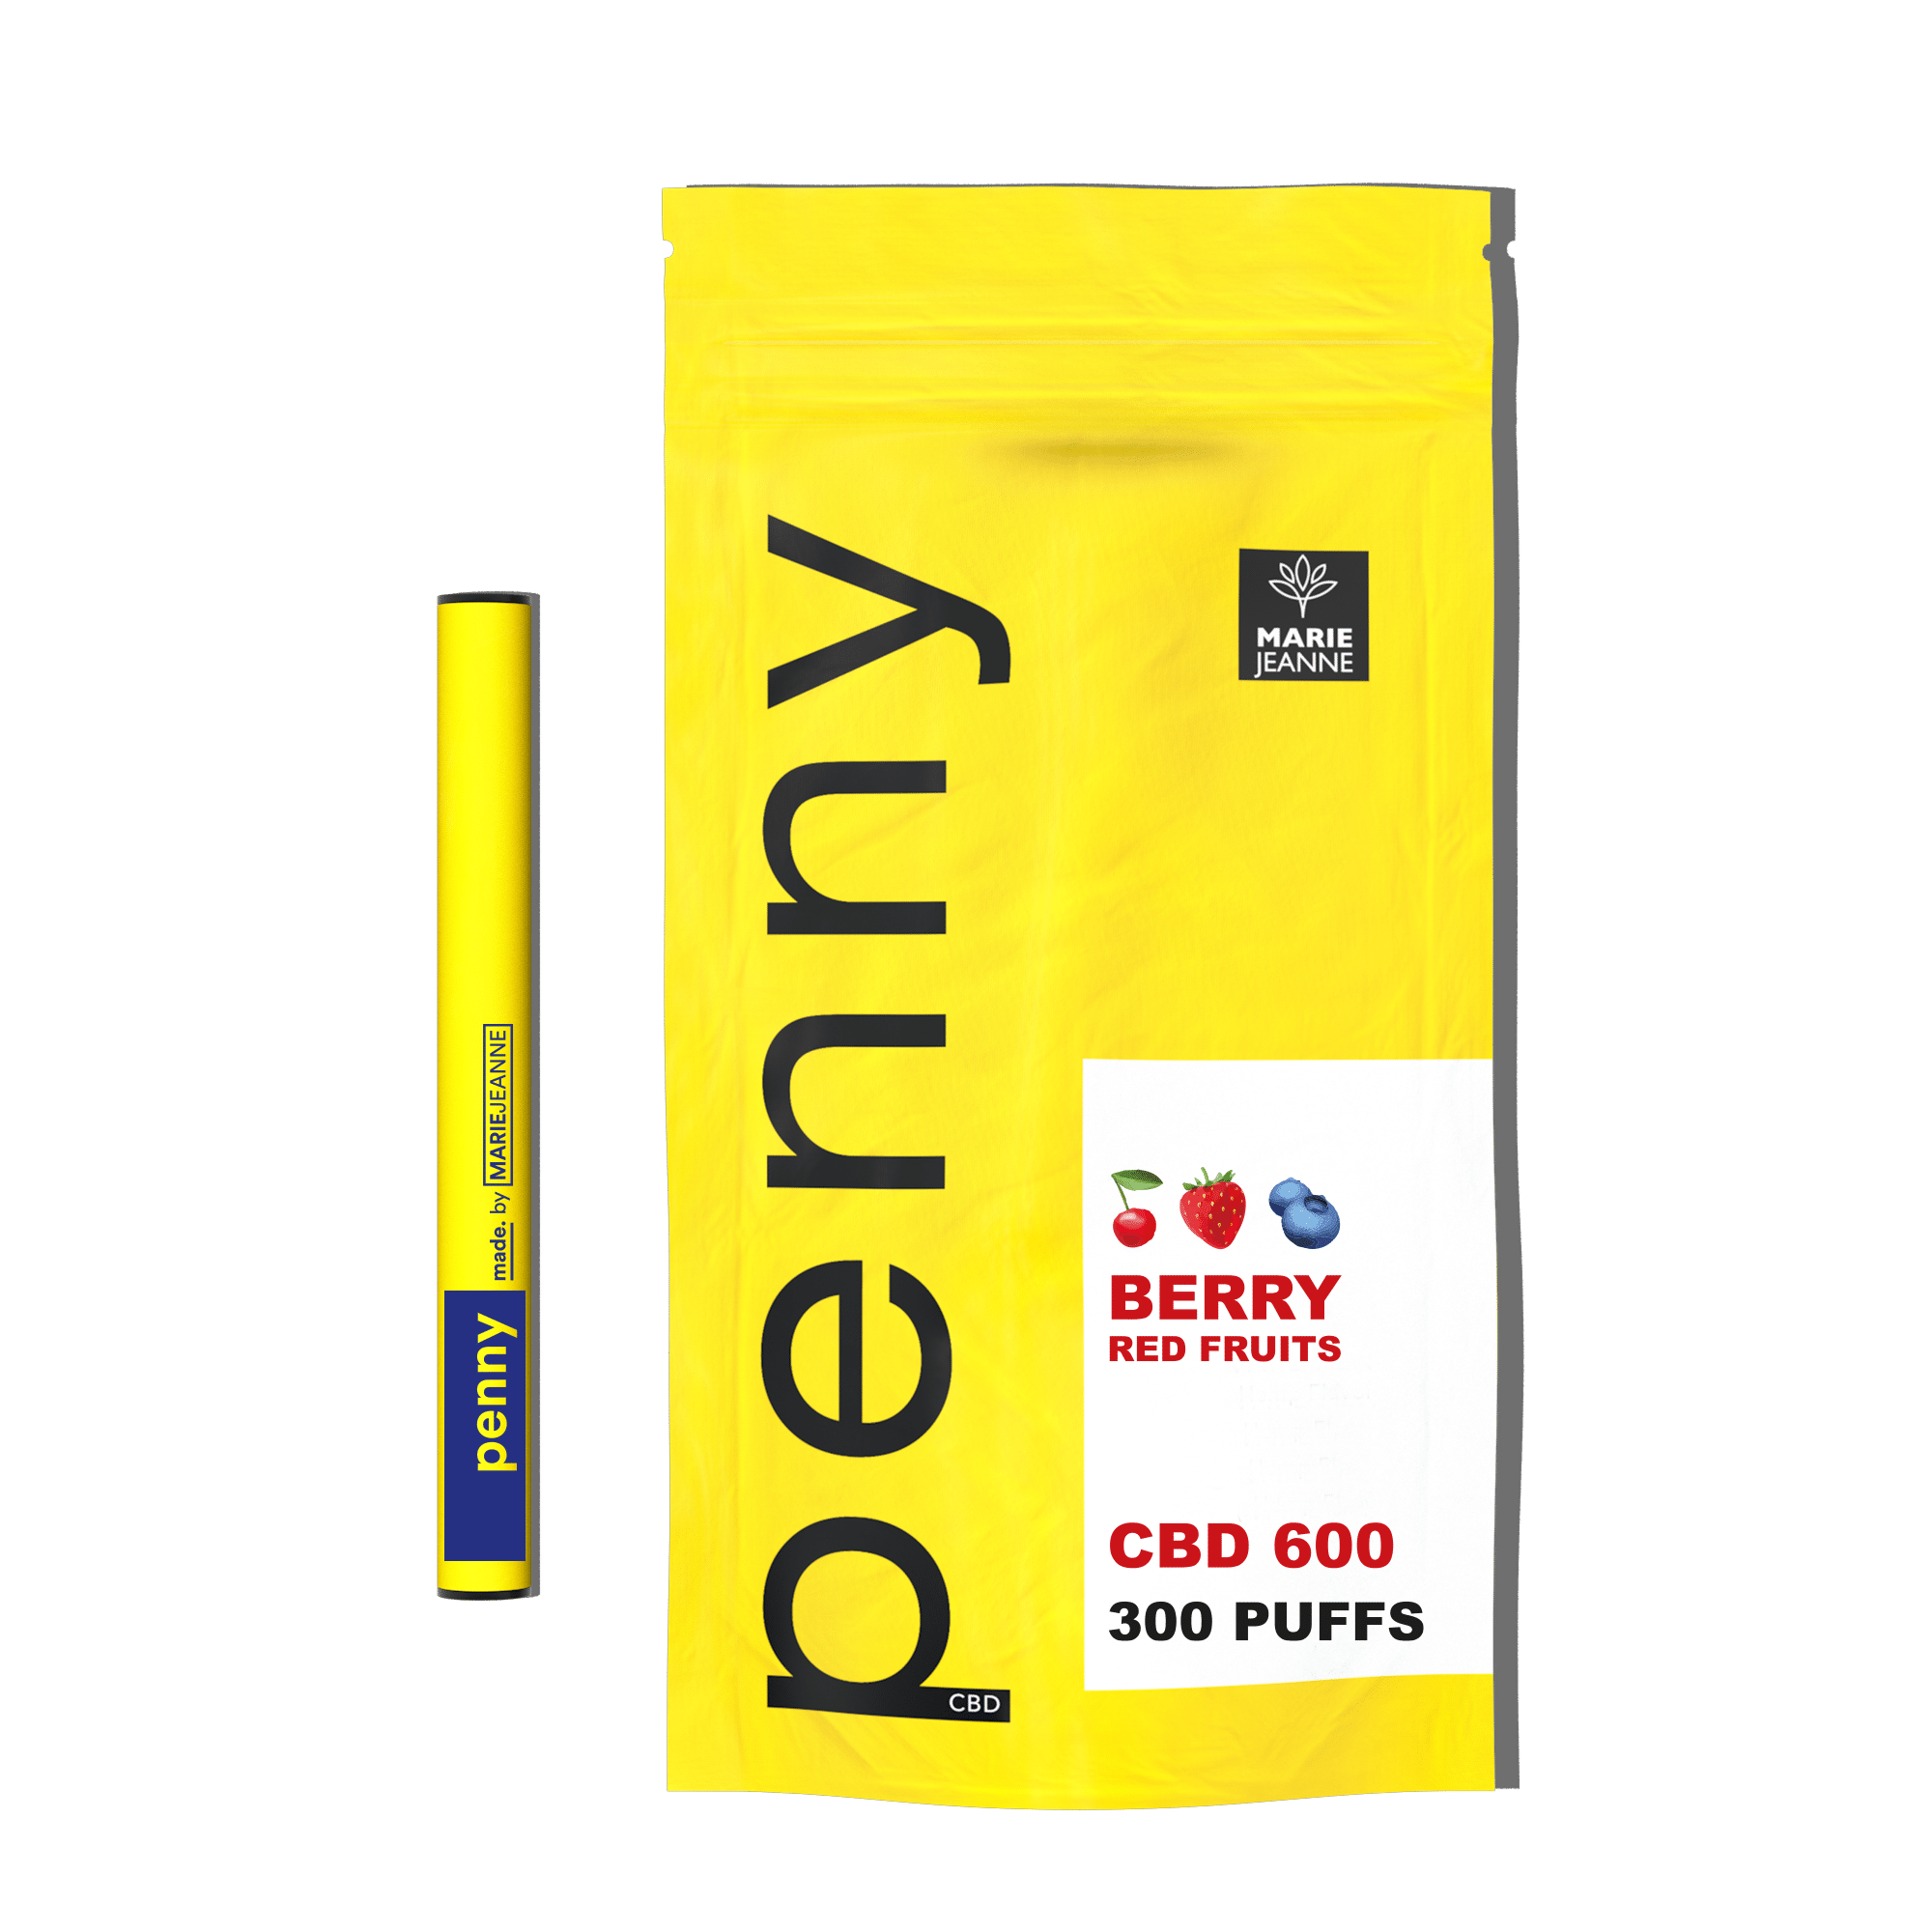 Marie Jeanne Penny Berry - Puff CBD Saveur Fruits Rouges, Vaping